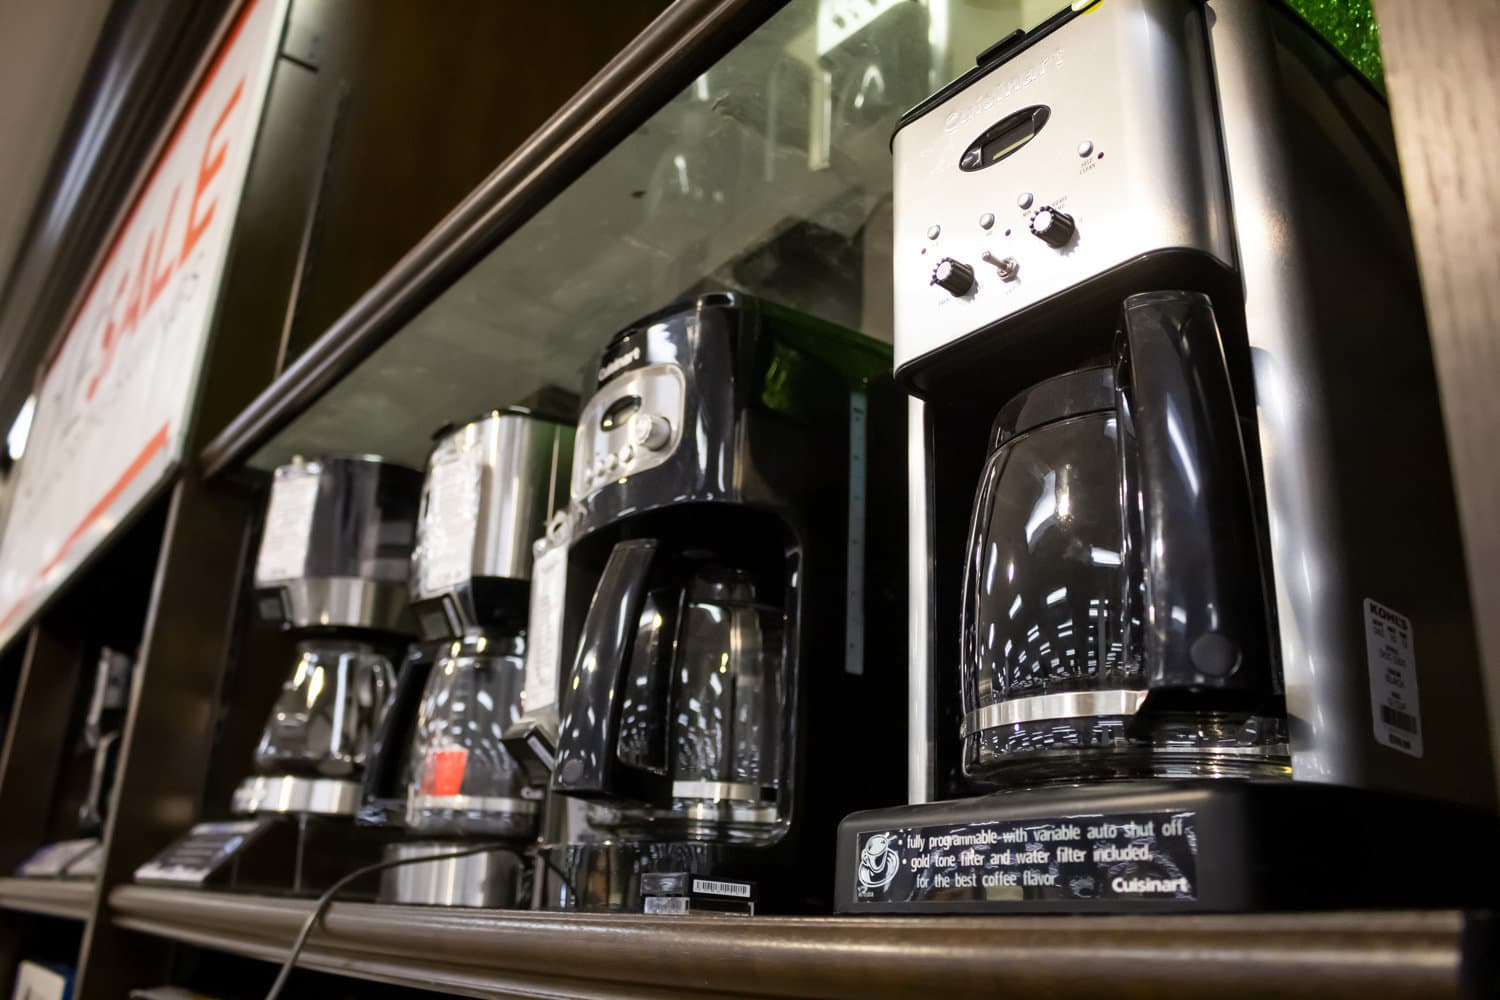 Several Cuisinart coffee maker machines on display at a local department store.